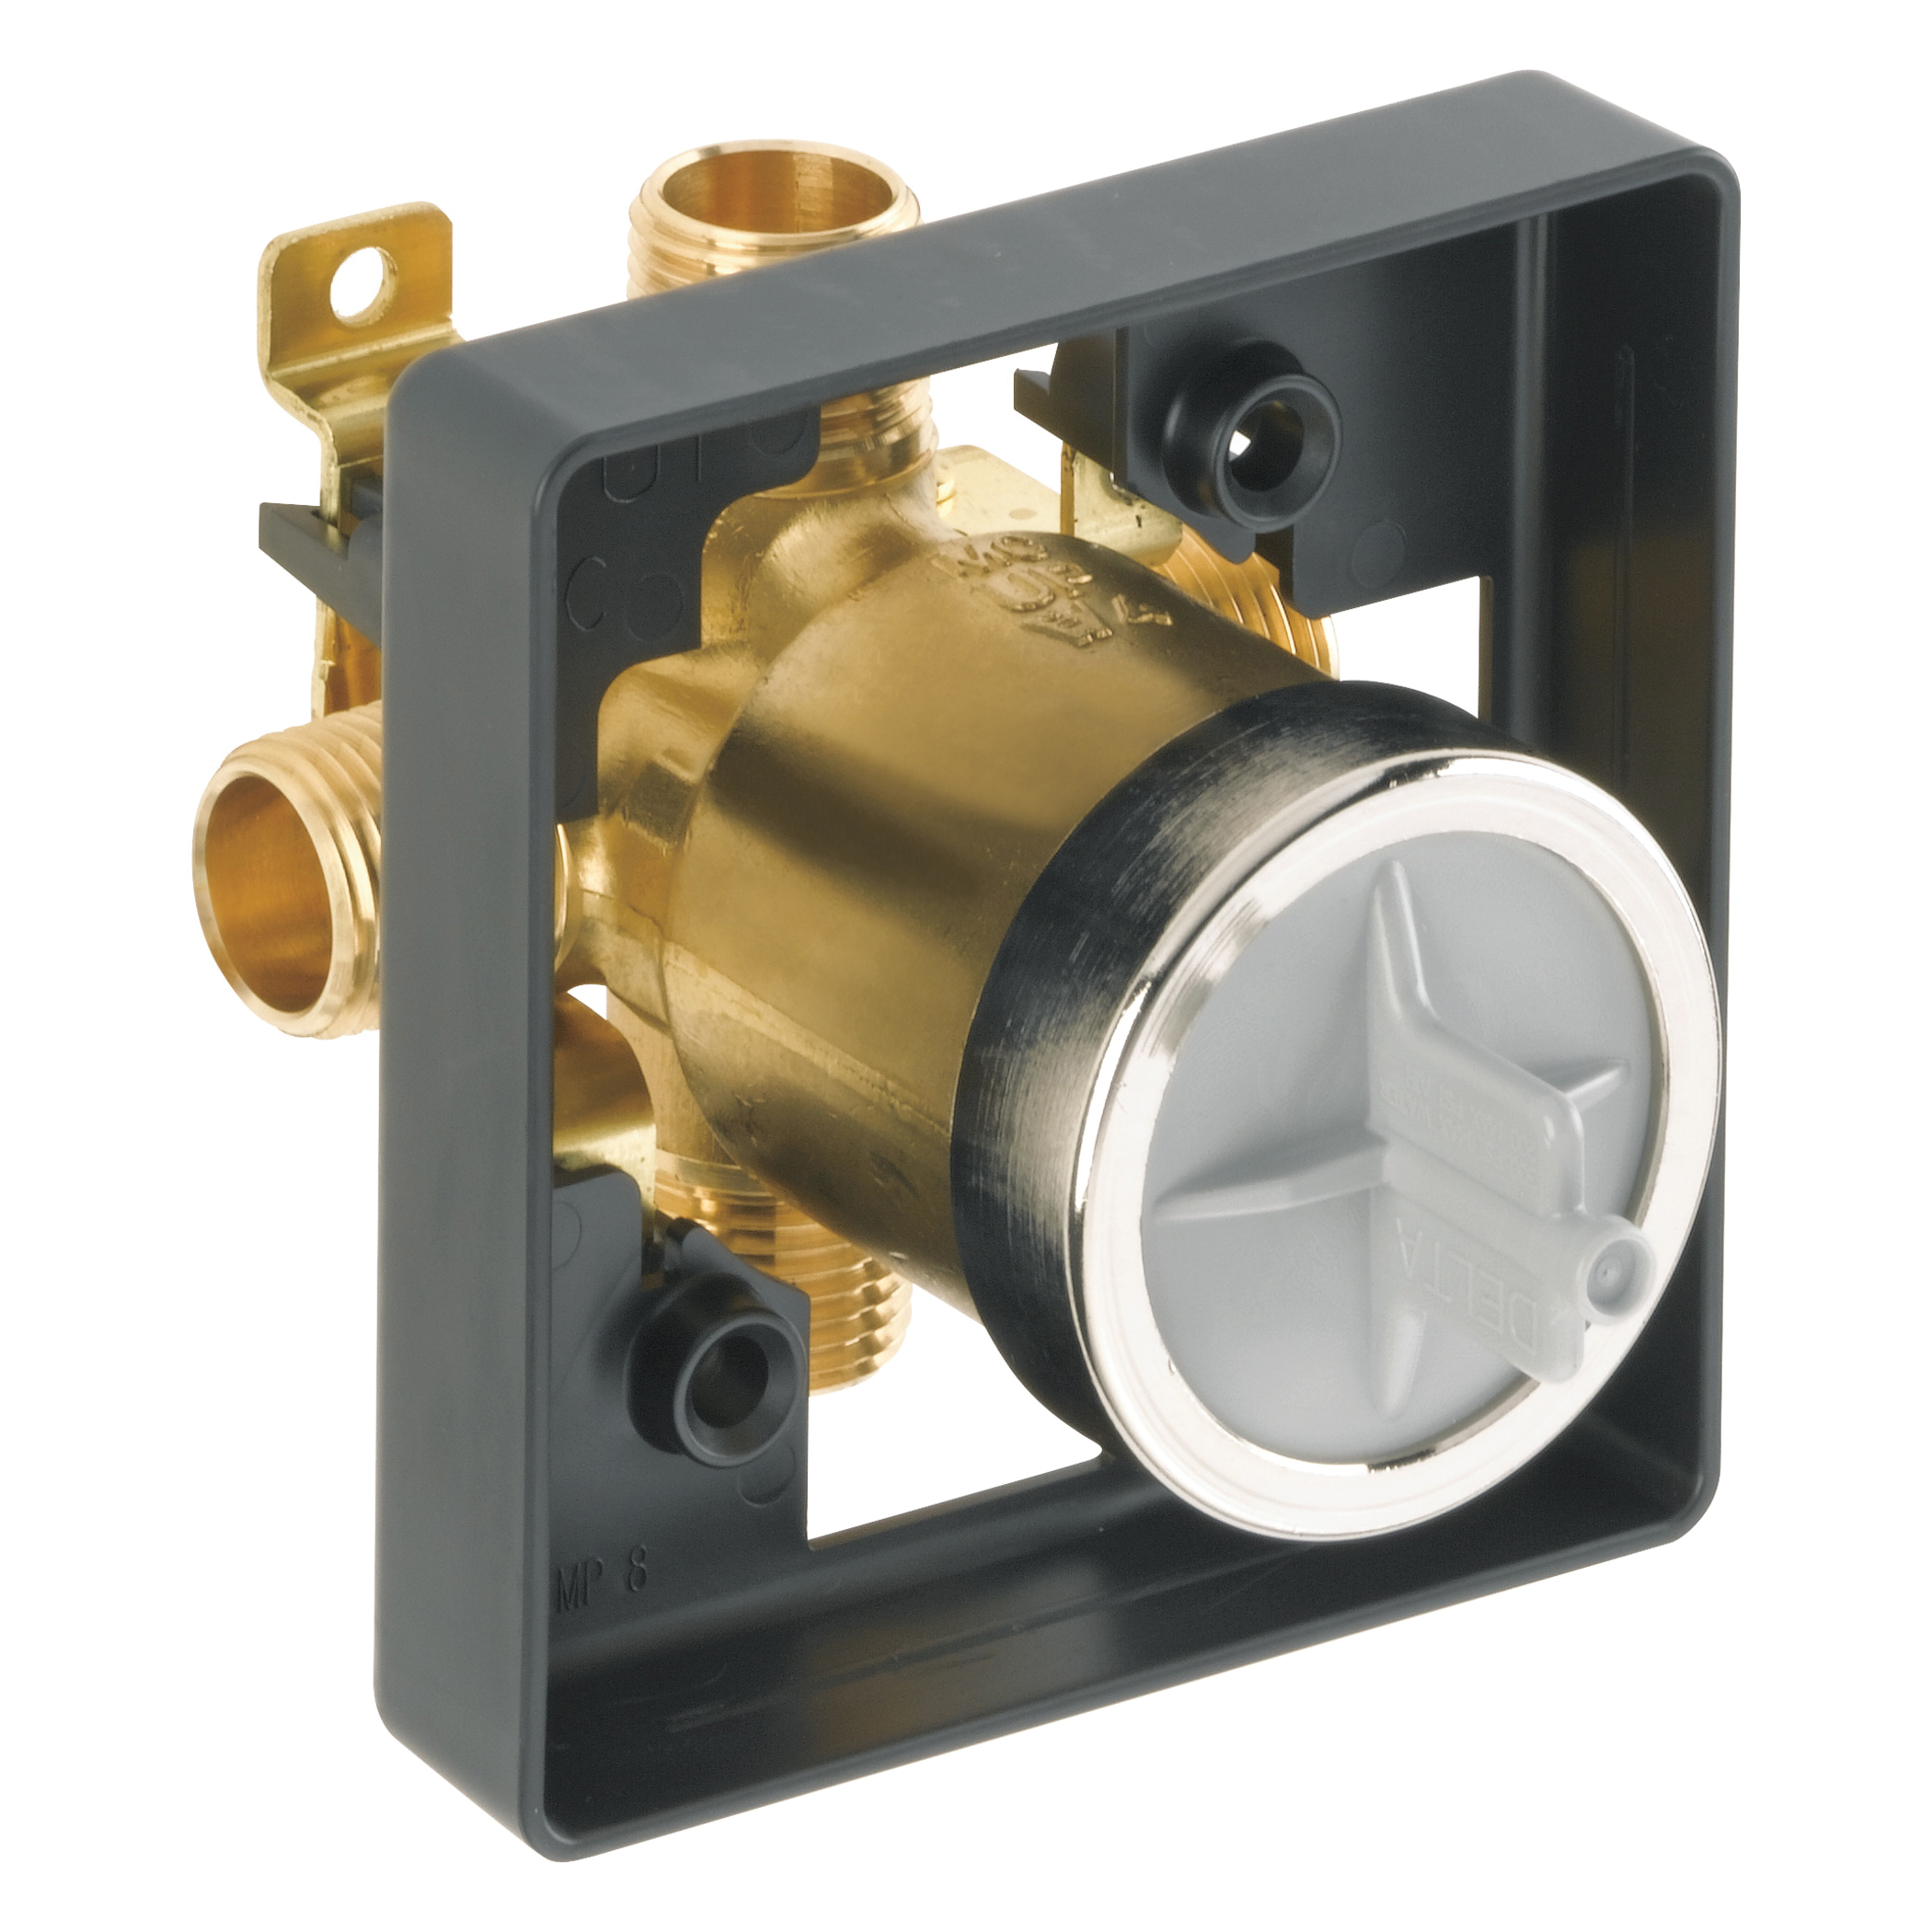 DELTA® R10000-UN Universal Tub and Shower Rough-In Valve Body, Forged Brass Body, Domestic